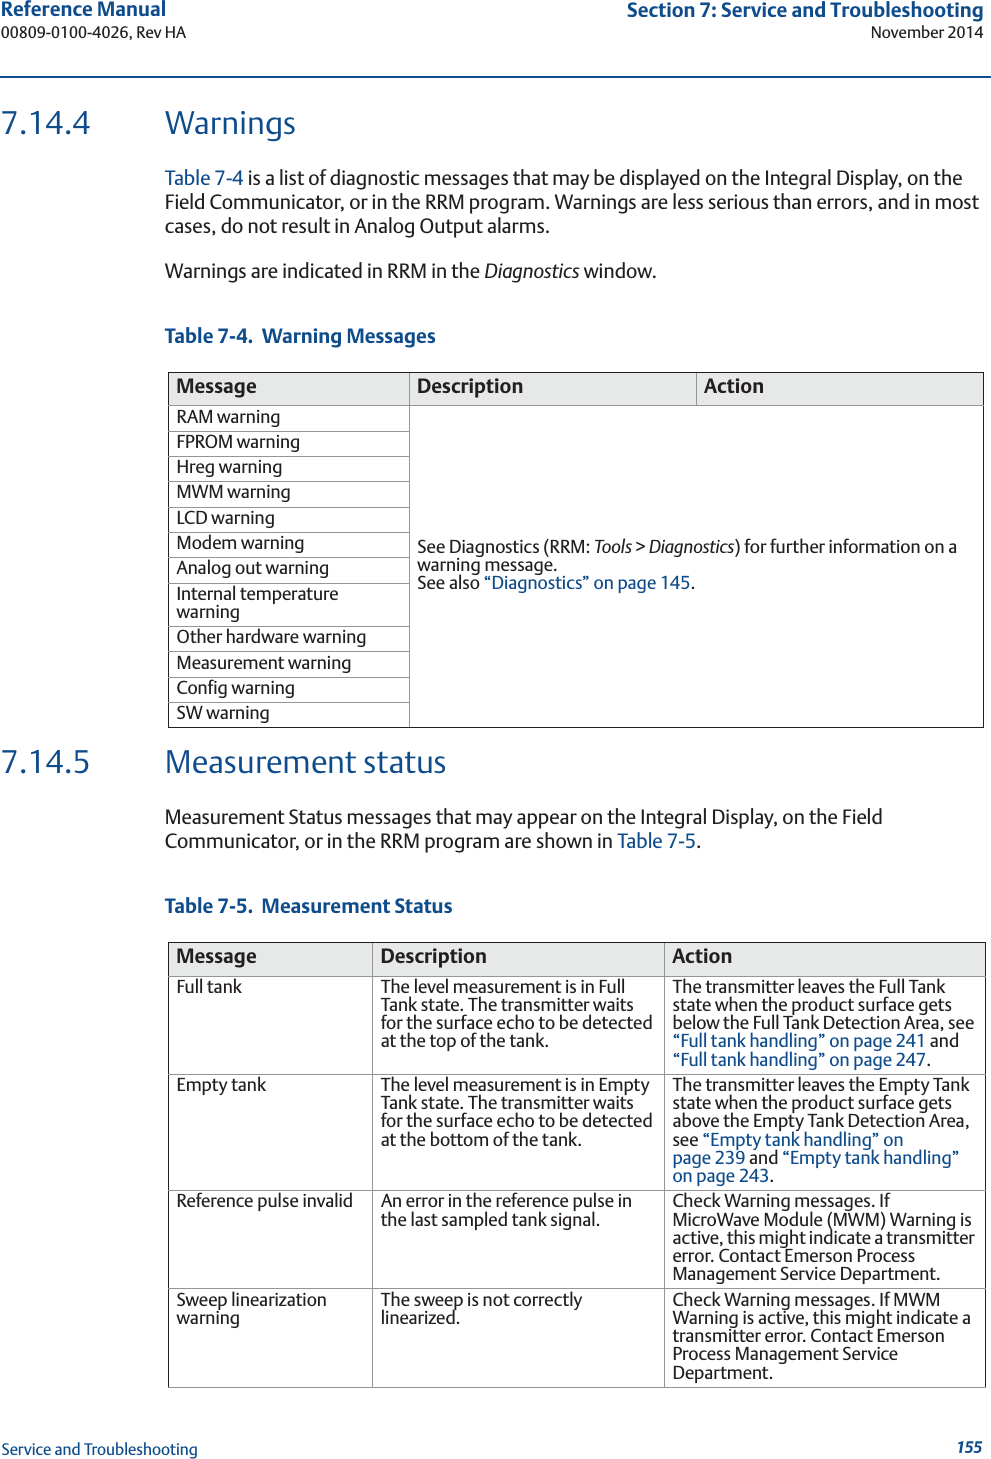 155Reference Manual 00809-0100-4026, Rev HASection 7: Service and TroubleshootingNovember 2014Service and Troubleshooting7.14.4 WarningsTable 7-4 is a list of diagnostic messages that may be displayed on the Integral Display, on the Field Communicator, or in the RRM program. Warnings are less serious than errors, and in most cases, do not result in Analog Output alarms.Warnings are indicated in RRM in the Diagnostics window.Table 7-4.  Warning Messages7.14.5 Measurement statusMeasurement Status messages that may appear on the Integral Display, on the Field Communicator, or in the RRM program are shown in Table 7-5.Table 7-5.  Measurement StatusMessage Description ActionRAM warningSee Diagnostics (RRM: Tools &gt; Diagnostics) for further information on a warning message. See also “Diagnostics” on page 145.FPROM warningHreg warningMWM warningLCD warningModem warningAnalog out warningInternal temperature warningOther hardware warningMeasurement warningConfig warningSW warningMessage Description ActionFull tank The level measurement is in Full Tank state. The transmitter waits for the surface echo to be detected at the top of the tank.The transmitter leaves the Full Tank state when the product surface gets below the Full Tank Detection Area, see “Full tank handling” on page 241 and “Full tank handling” on page 247.Empty tank The level measurement is in Empty Tank state. The transmitter waits for the surface echo to be detected at the bottom of the tank.The transmitter leaves the Empty Tank state when the product surface gets above the Empty Tank Detection Area, see “Empty tank handling” on page 239 and “Empty tank handling” on page 243.Reference pulse invalid An error in the reference pulse in the last sampled tank signal. Check Warning messages. If MicroWave Module (MWM) Warning is active, this might indicate a transmitter error. Contact Emerson Process Management Service Department.Sweep linearization warning The sweep is not correctly linearized. Check Warning messages. If MWM Warning is active, this might indicate a transmitter error. Contact Emerson Process Management Service Department.